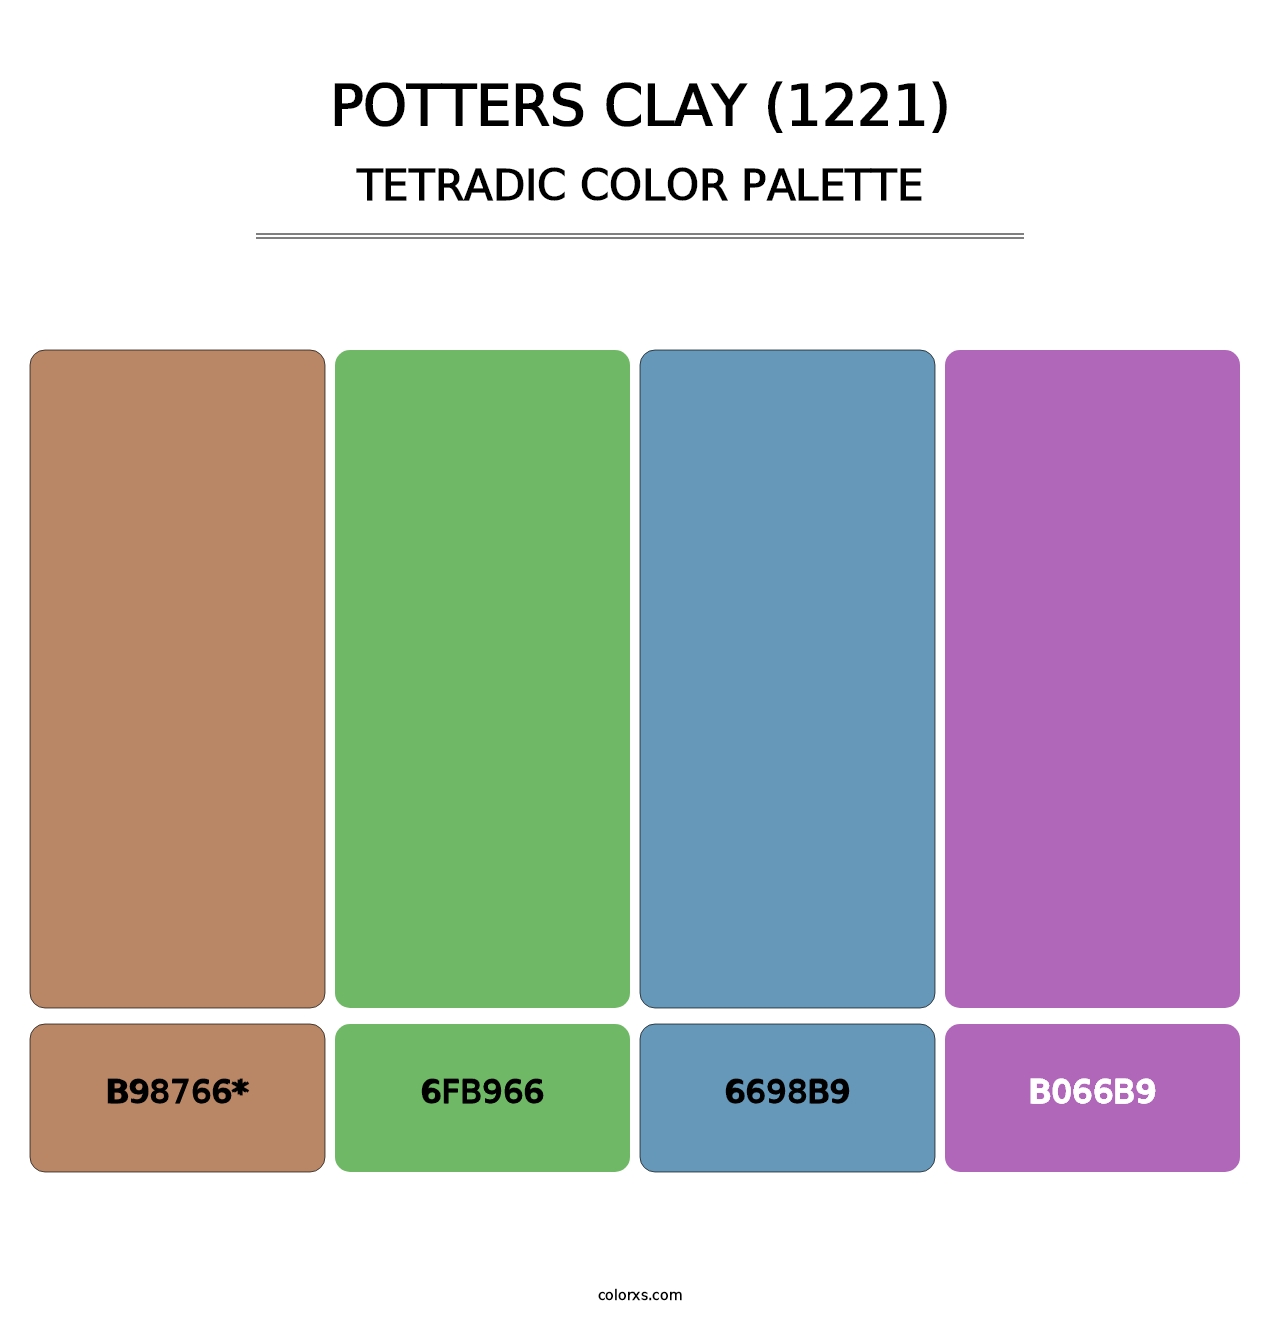 Potters Clay (1221) - Tetradic Color Palette